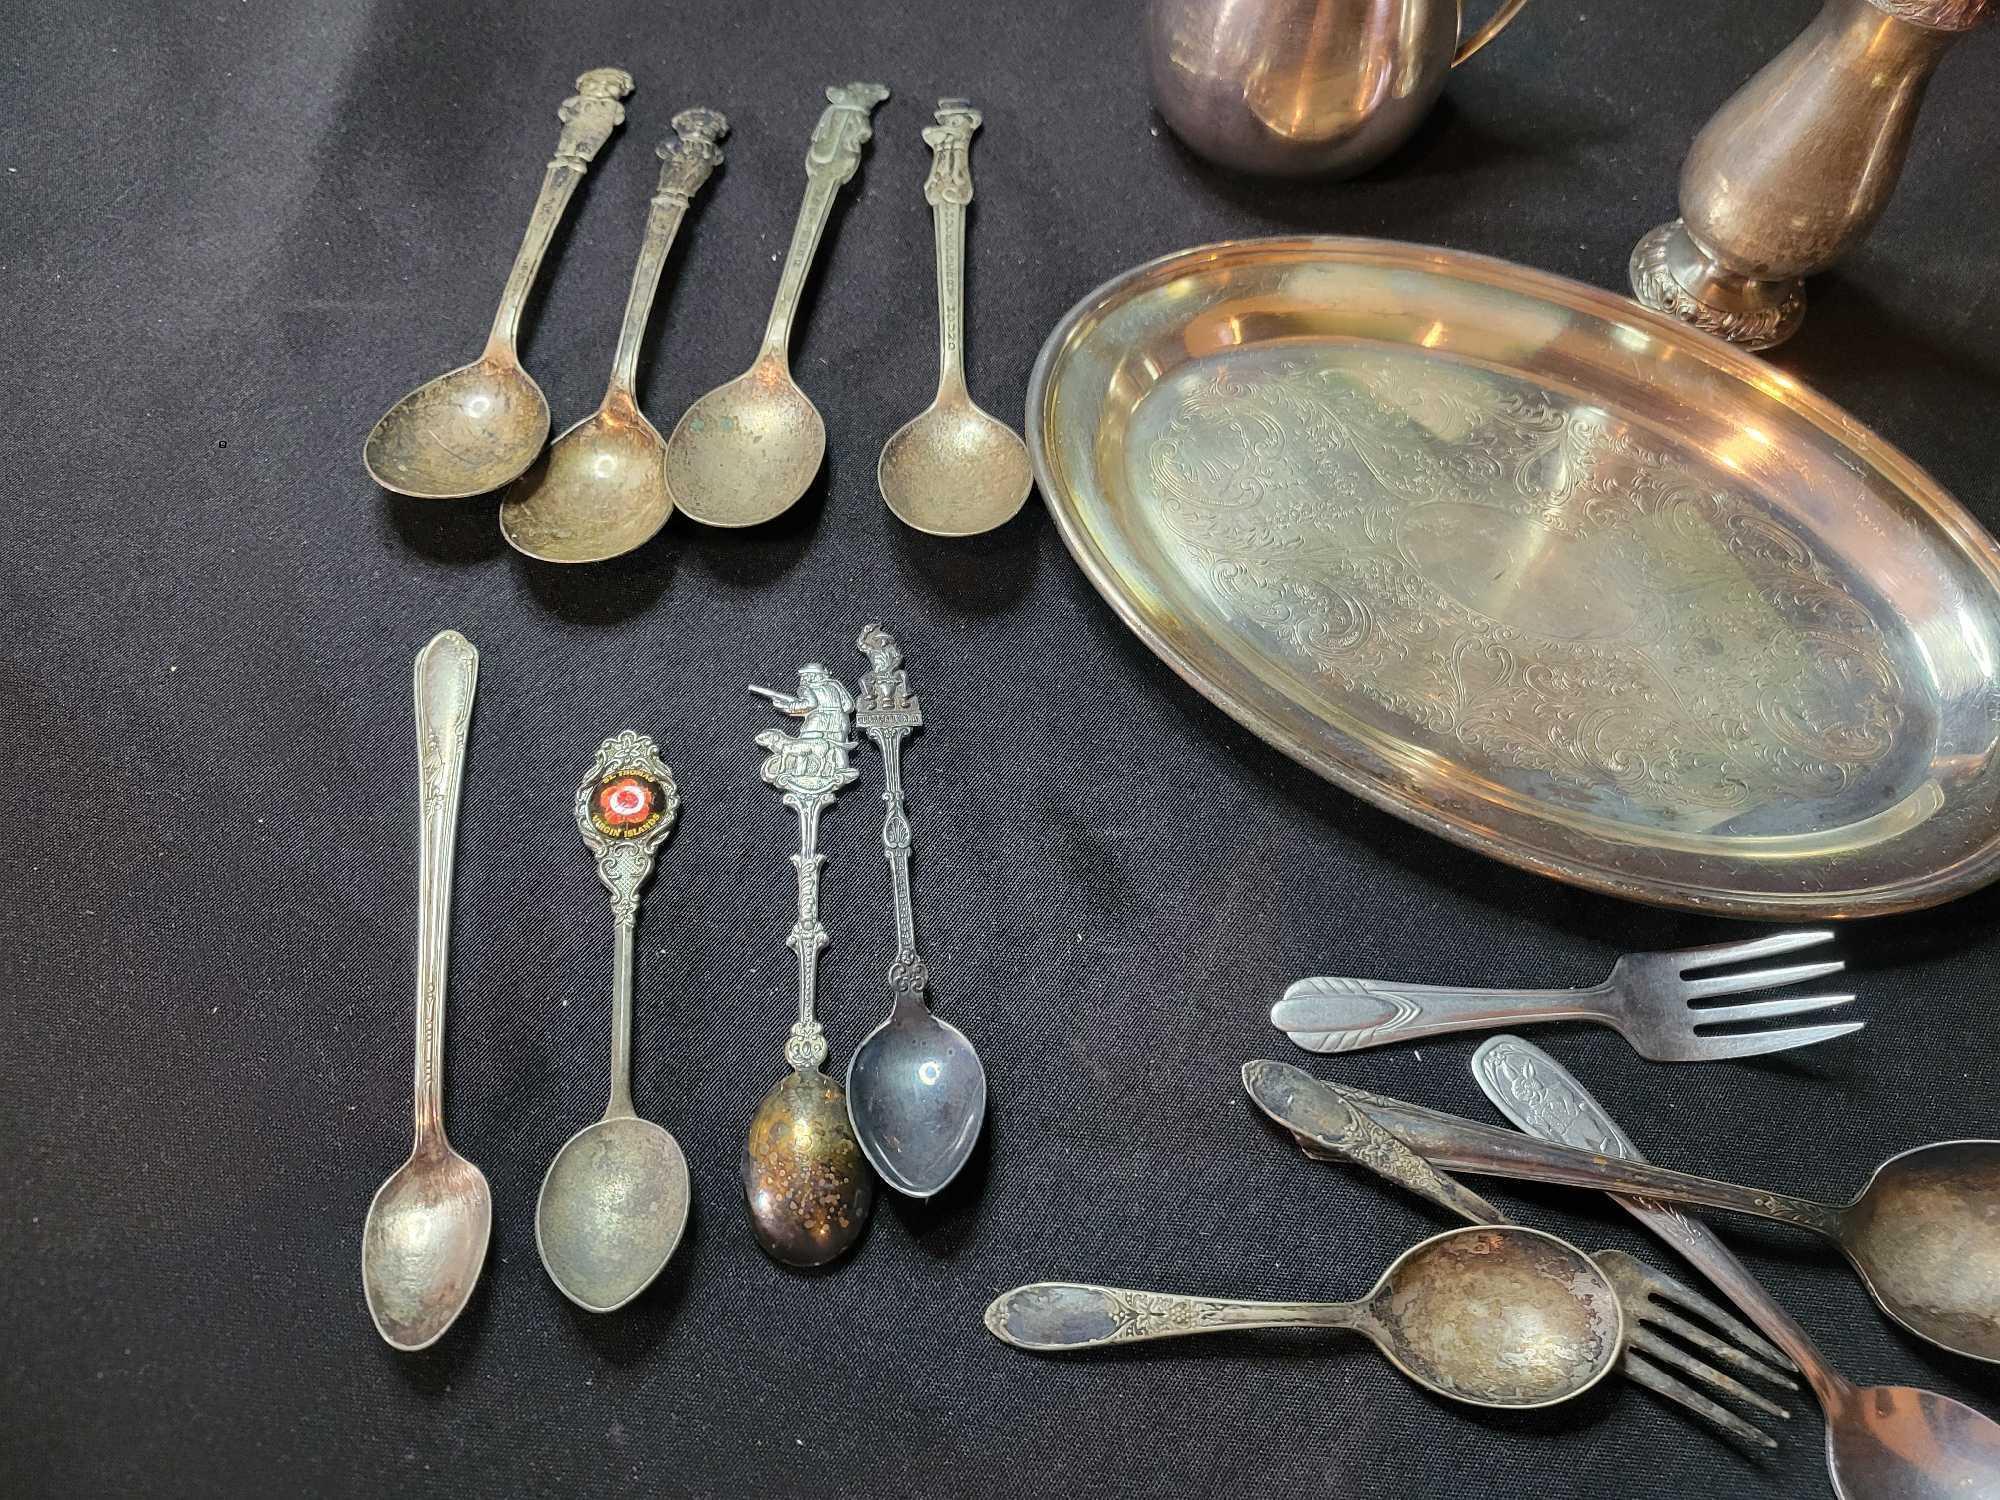 Group of mostly plated flatware, one piece marked sterling and additional spoon believed to be